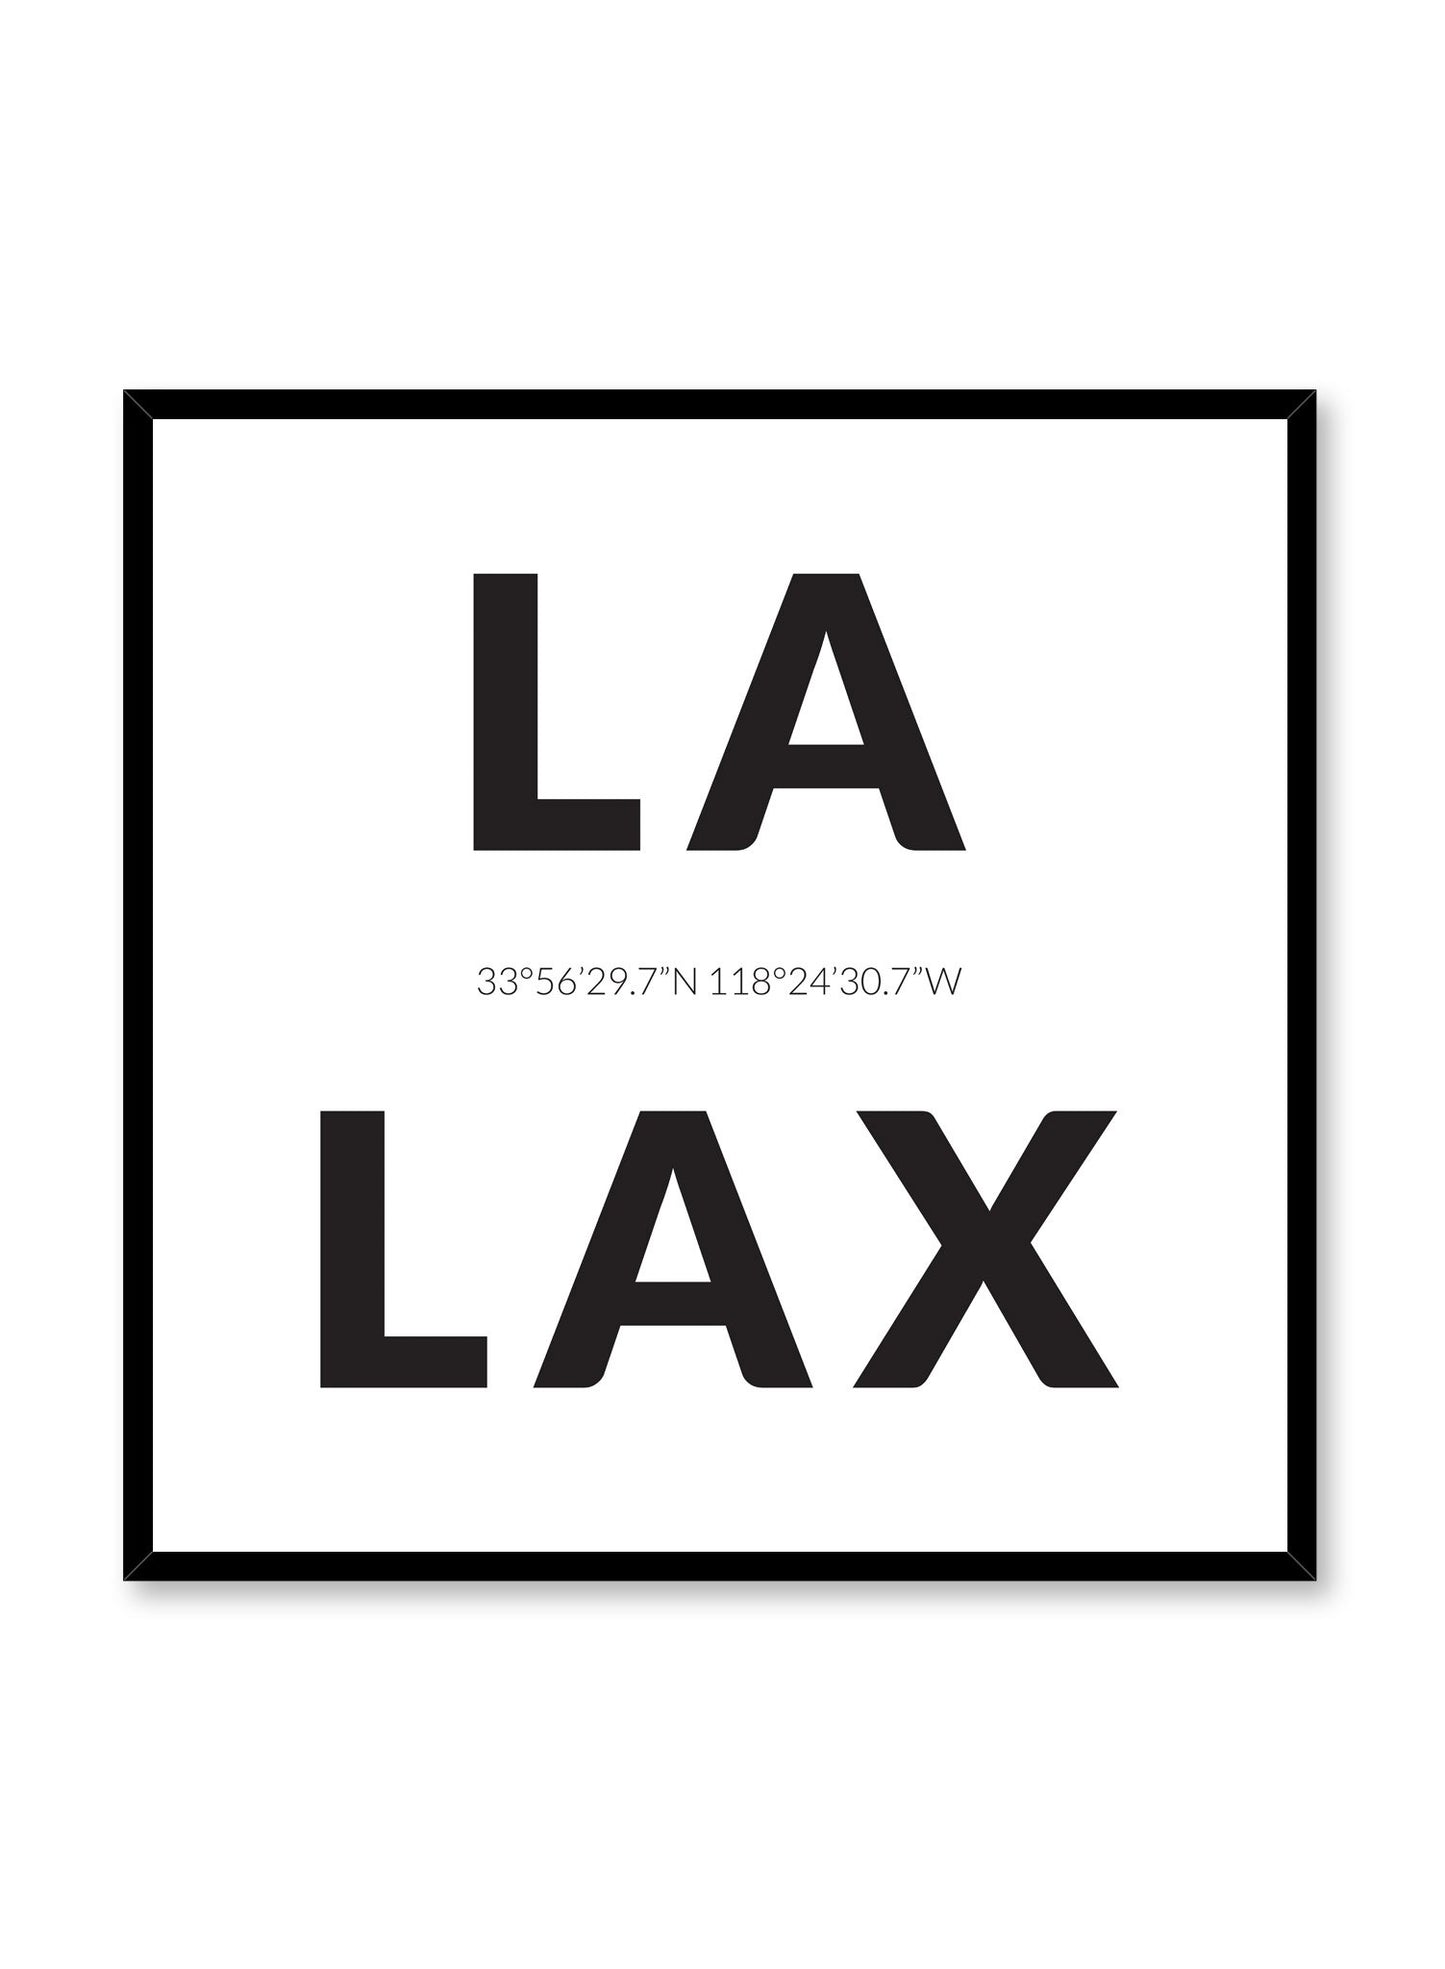 Minimalist design poster by Opposite Wall with airport code Los Angeles LAX